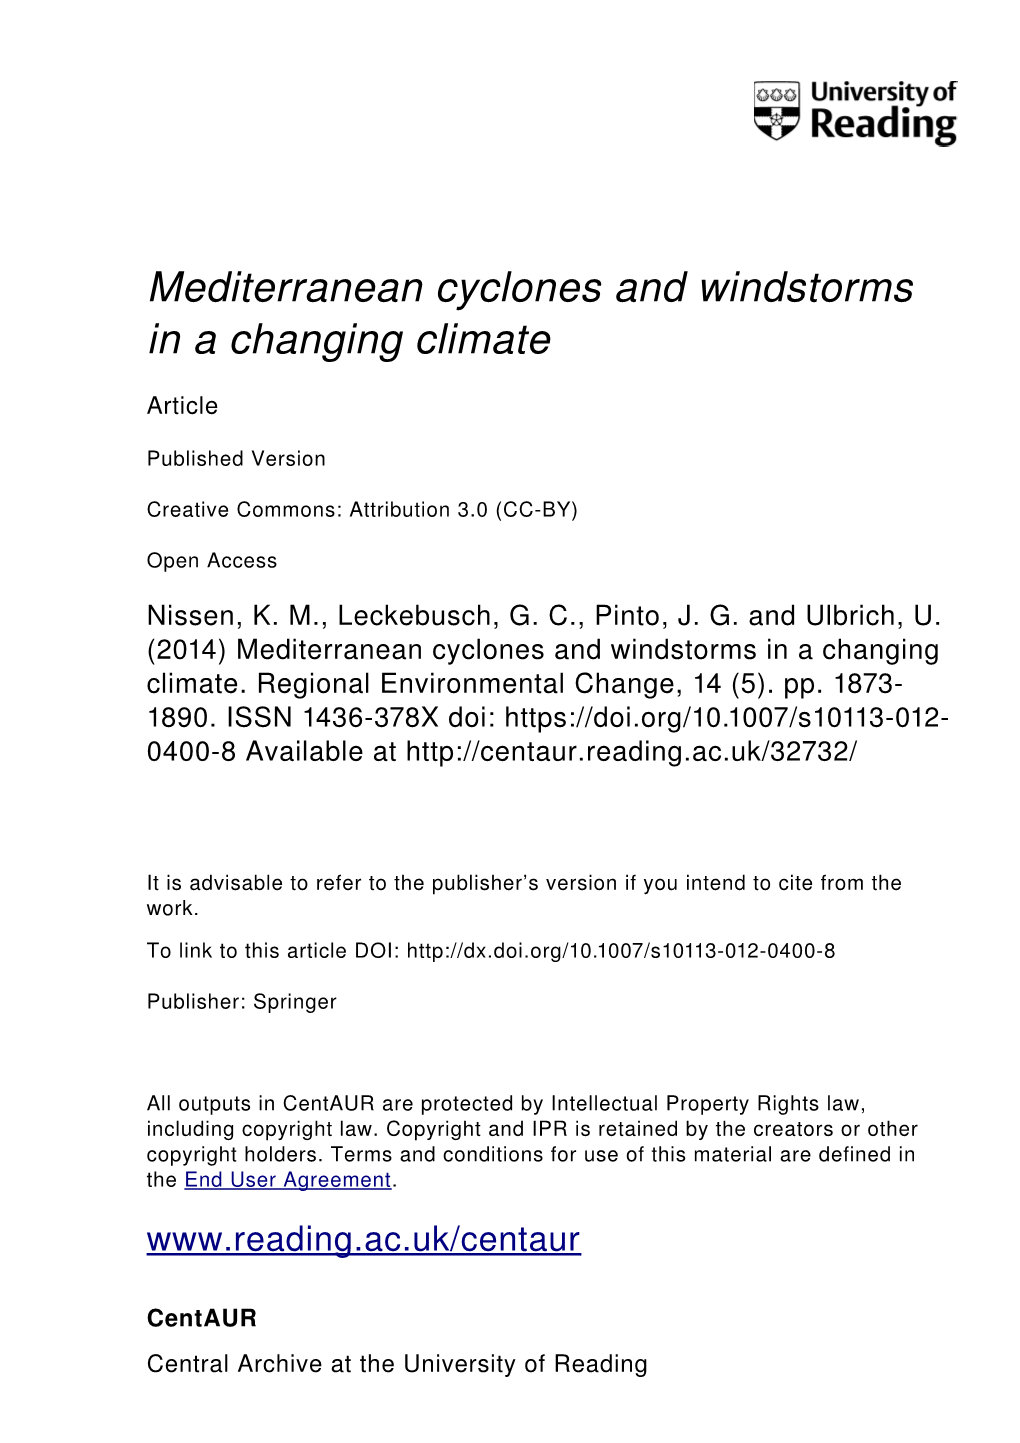 Mediterranean Cyclones and Windstorms in a Changing Climate